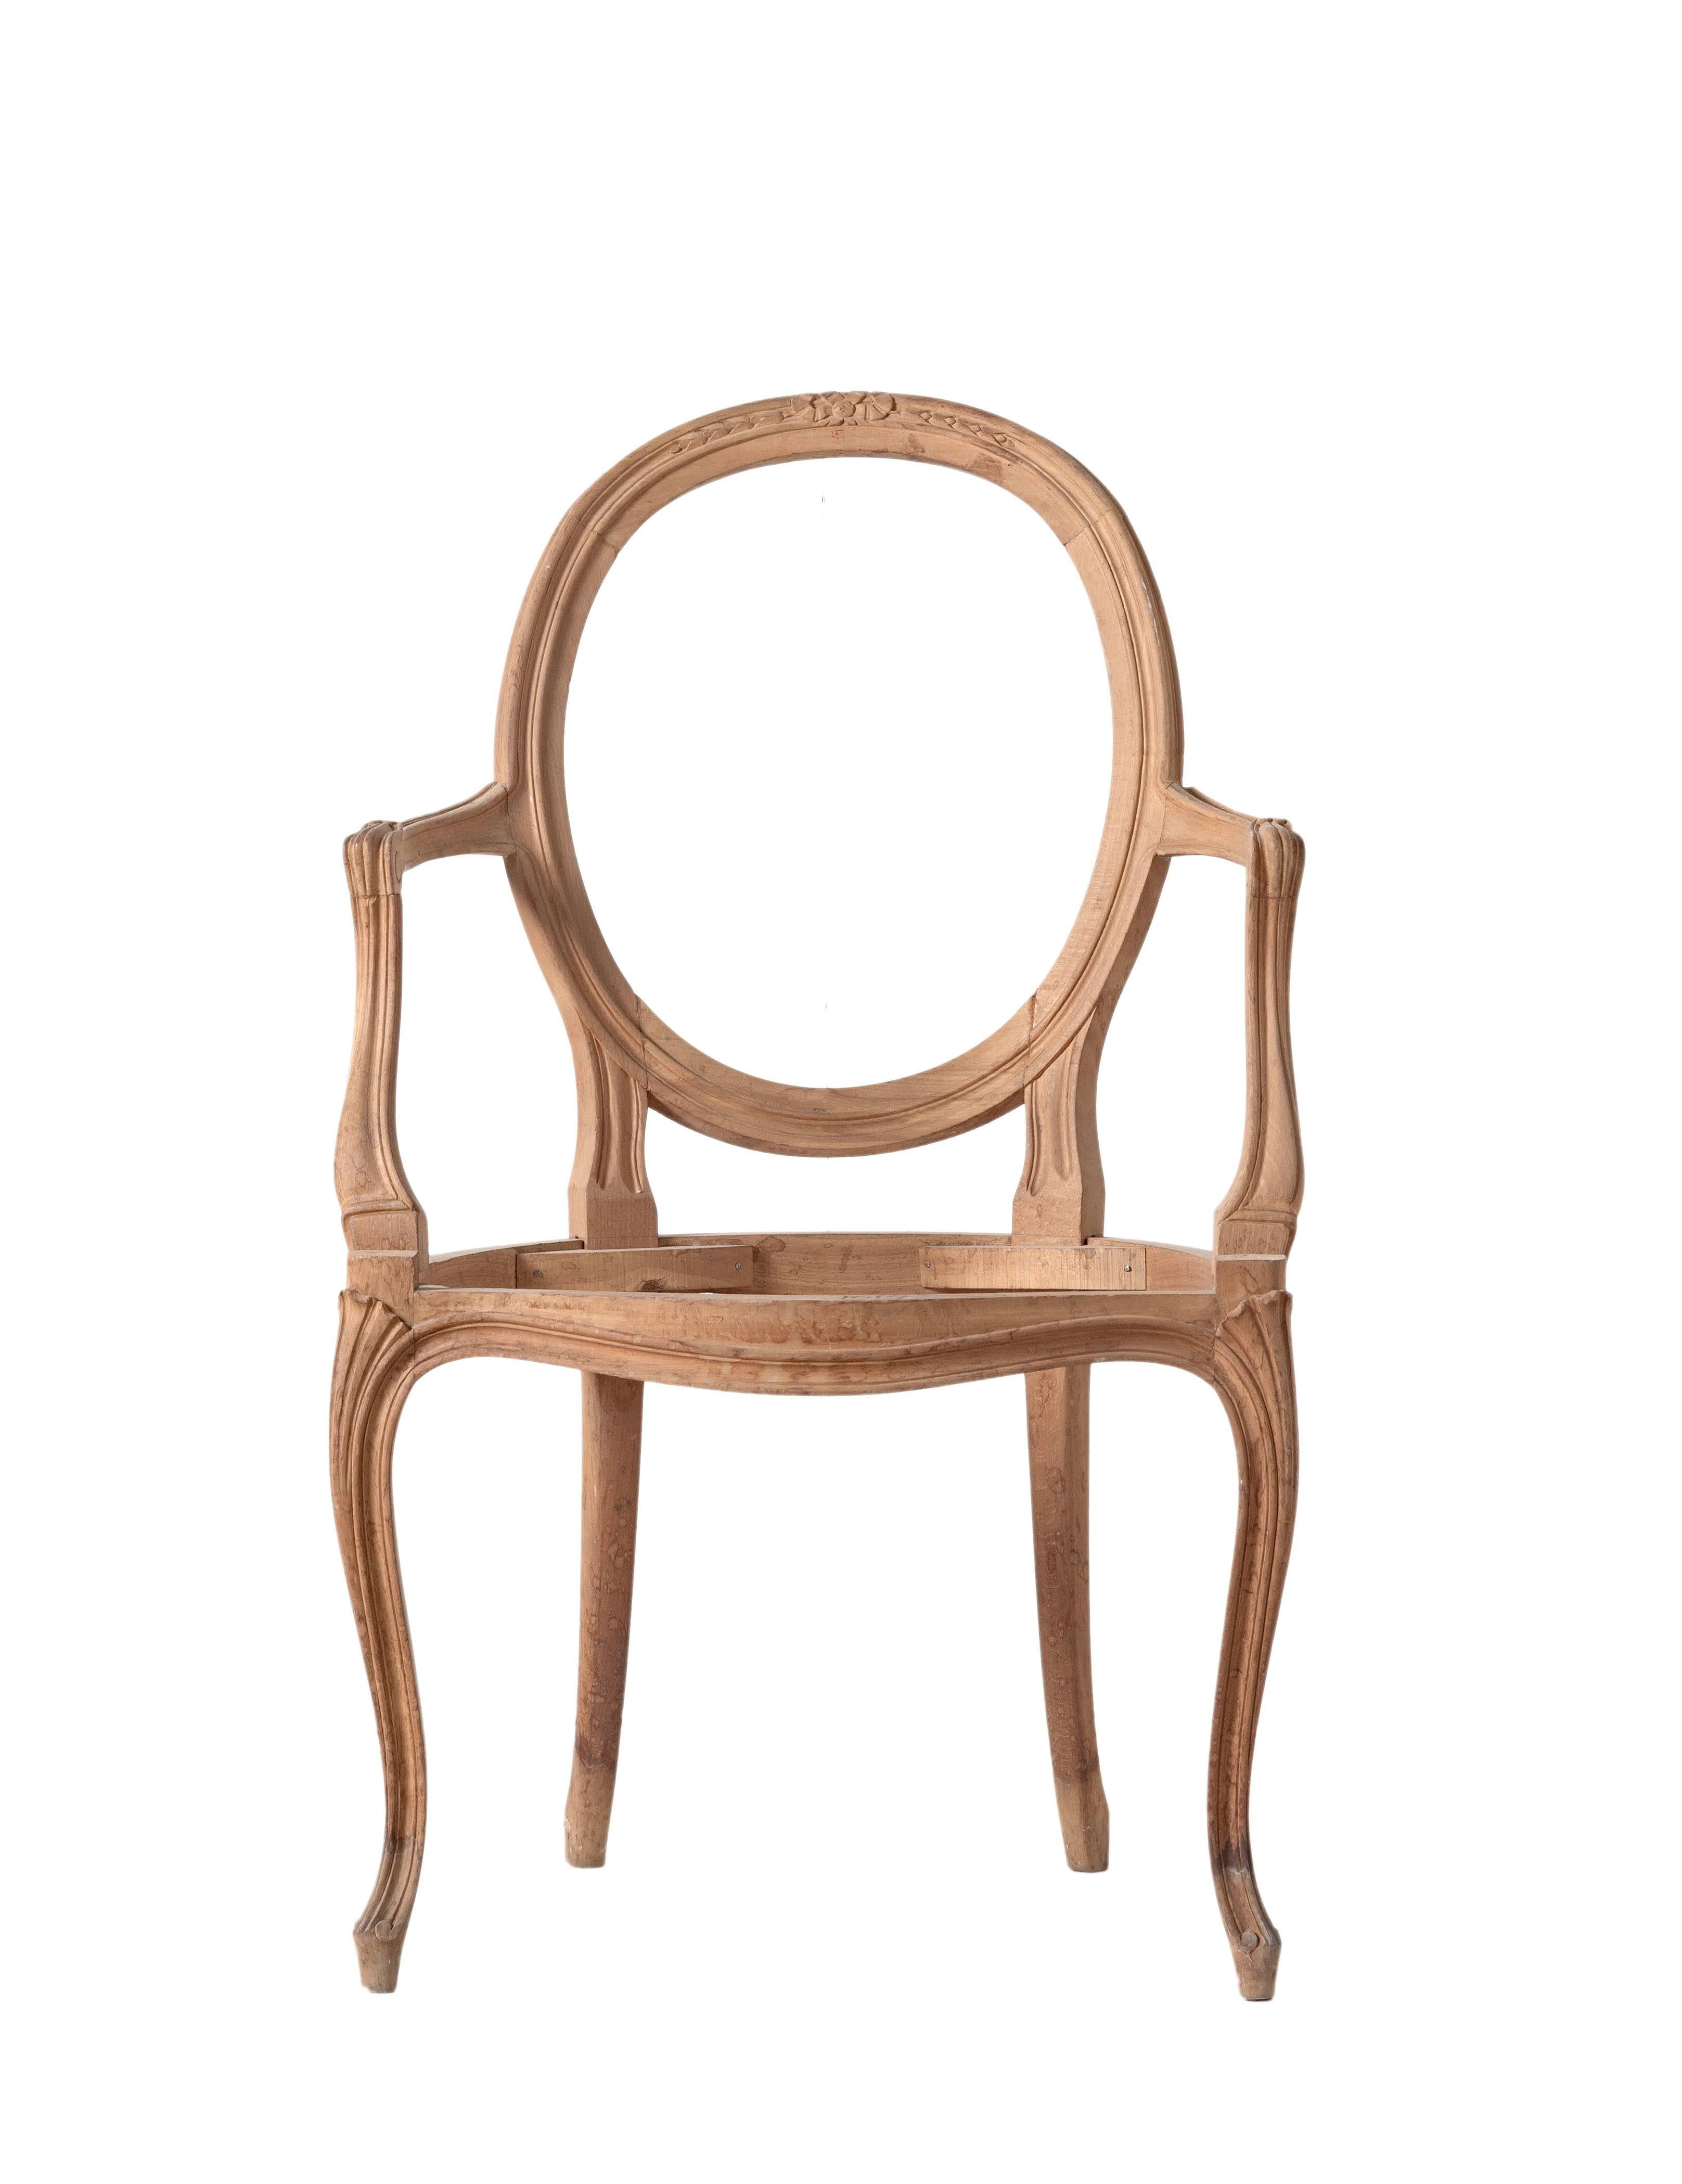 Italian frame, open-armchair handle carved
Size: H 38